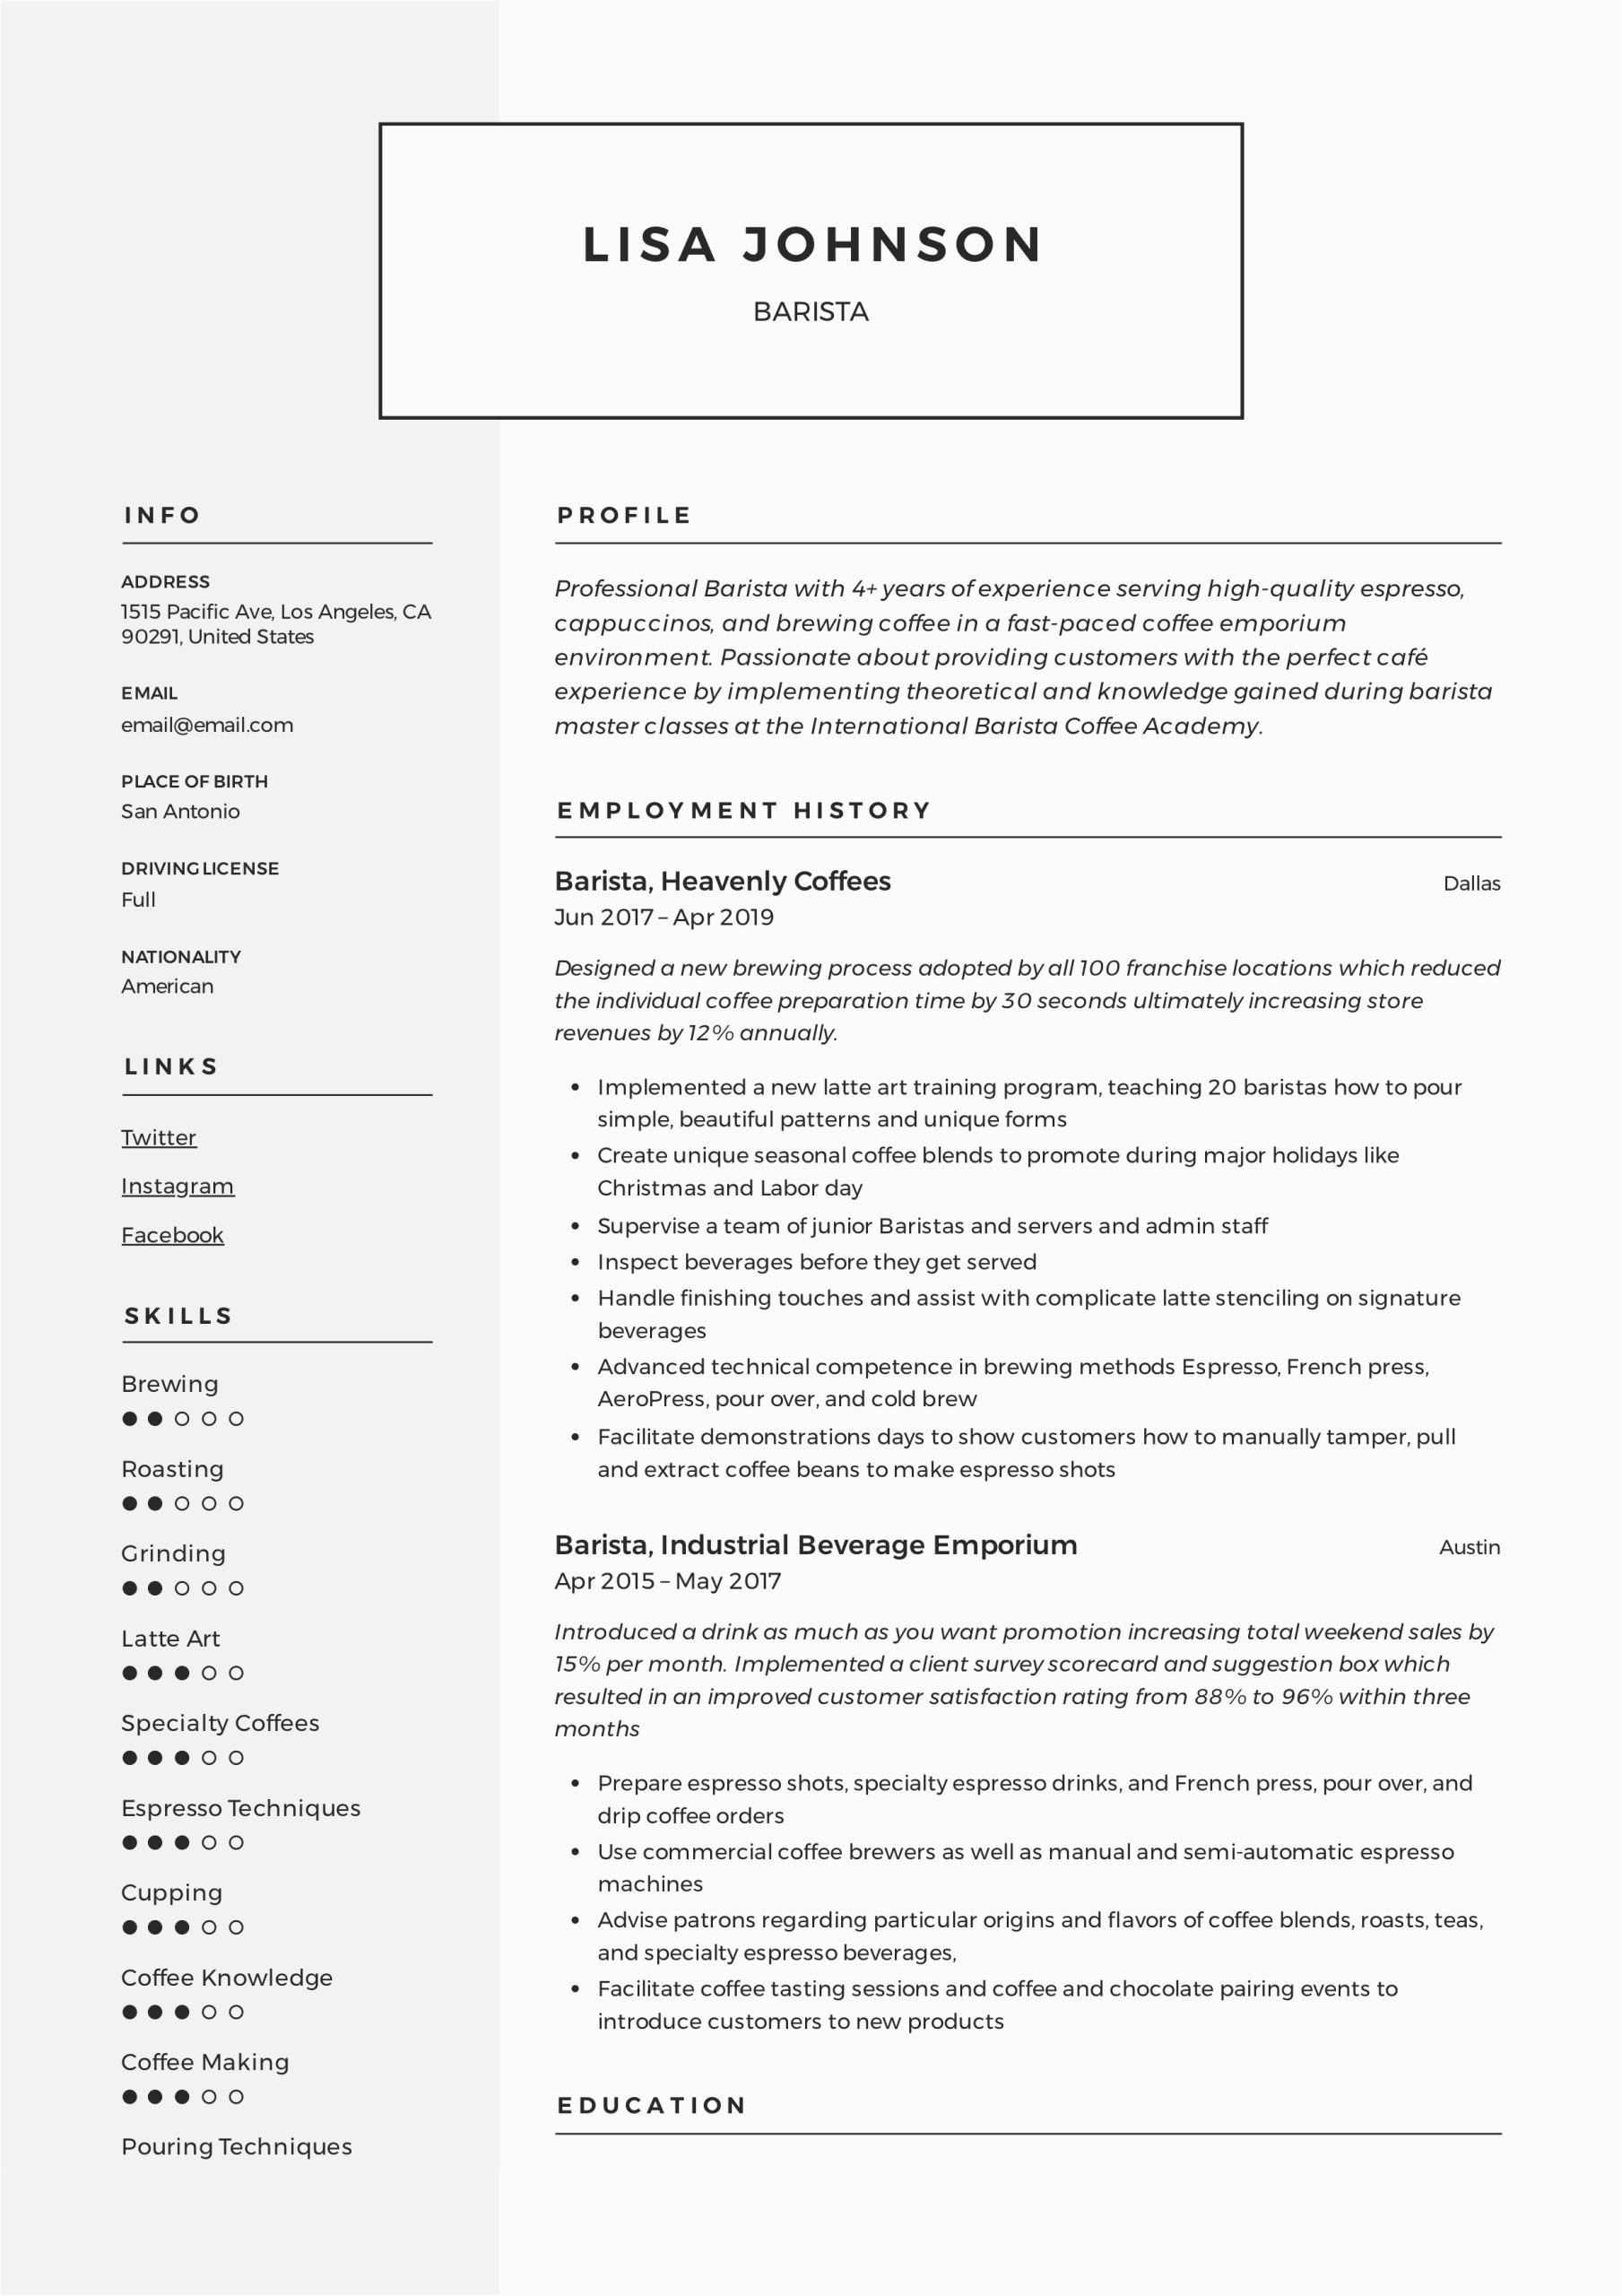 Sample Resume for Coffee Shop Barista Barista Resume & Writing Guide 12 Resume Templates